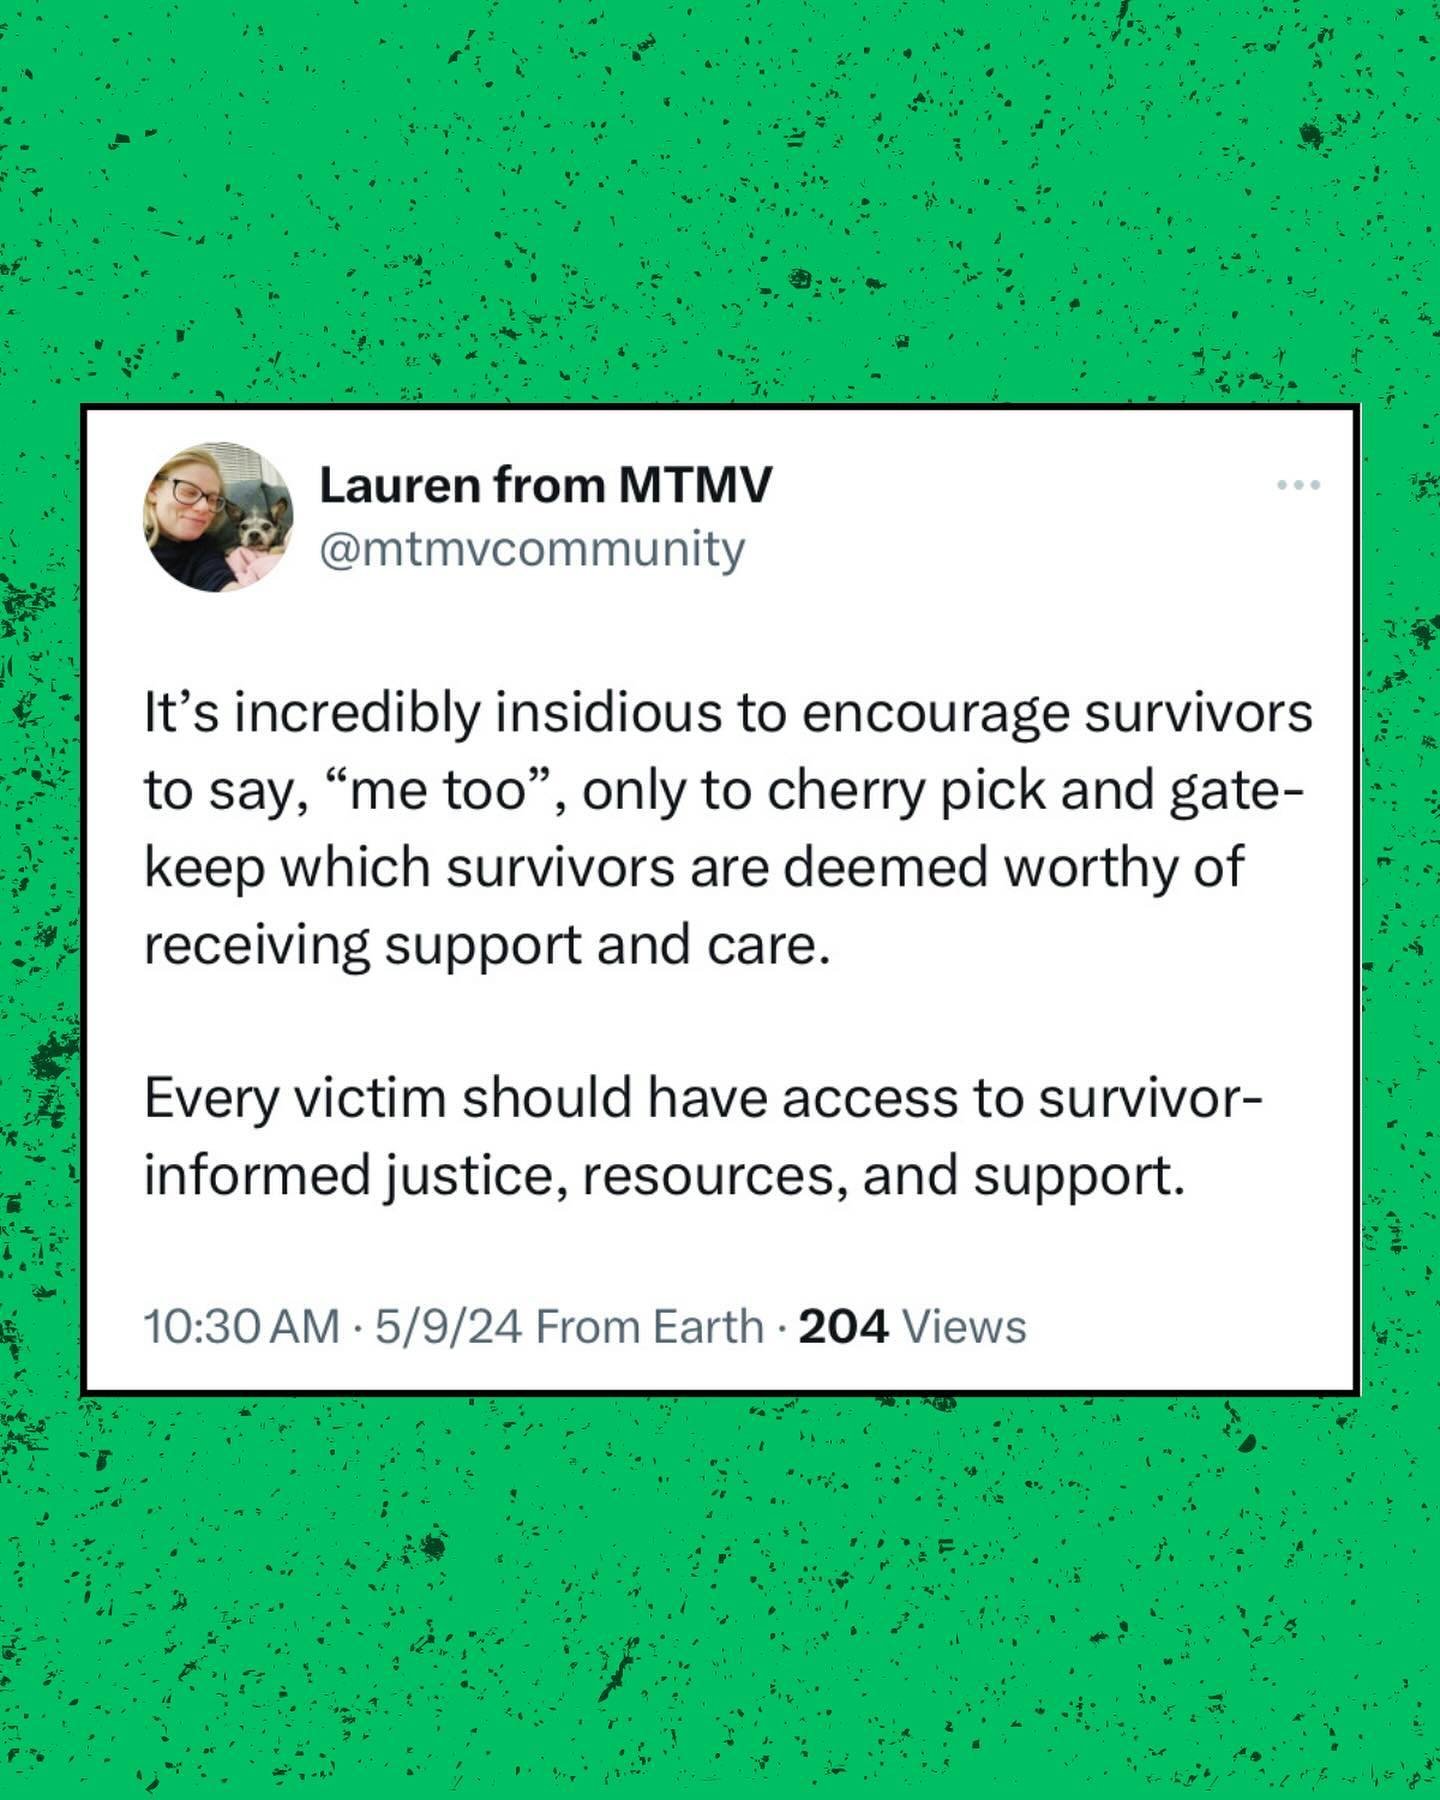 Every victim should have access to survivor-informed justice, resources, and support. 

[Image description: Distressed green background with a tweet that reads, It&rsquo;s incredibly insidious to encourage survivors to say, &ldquo;me too&rdquo;, only